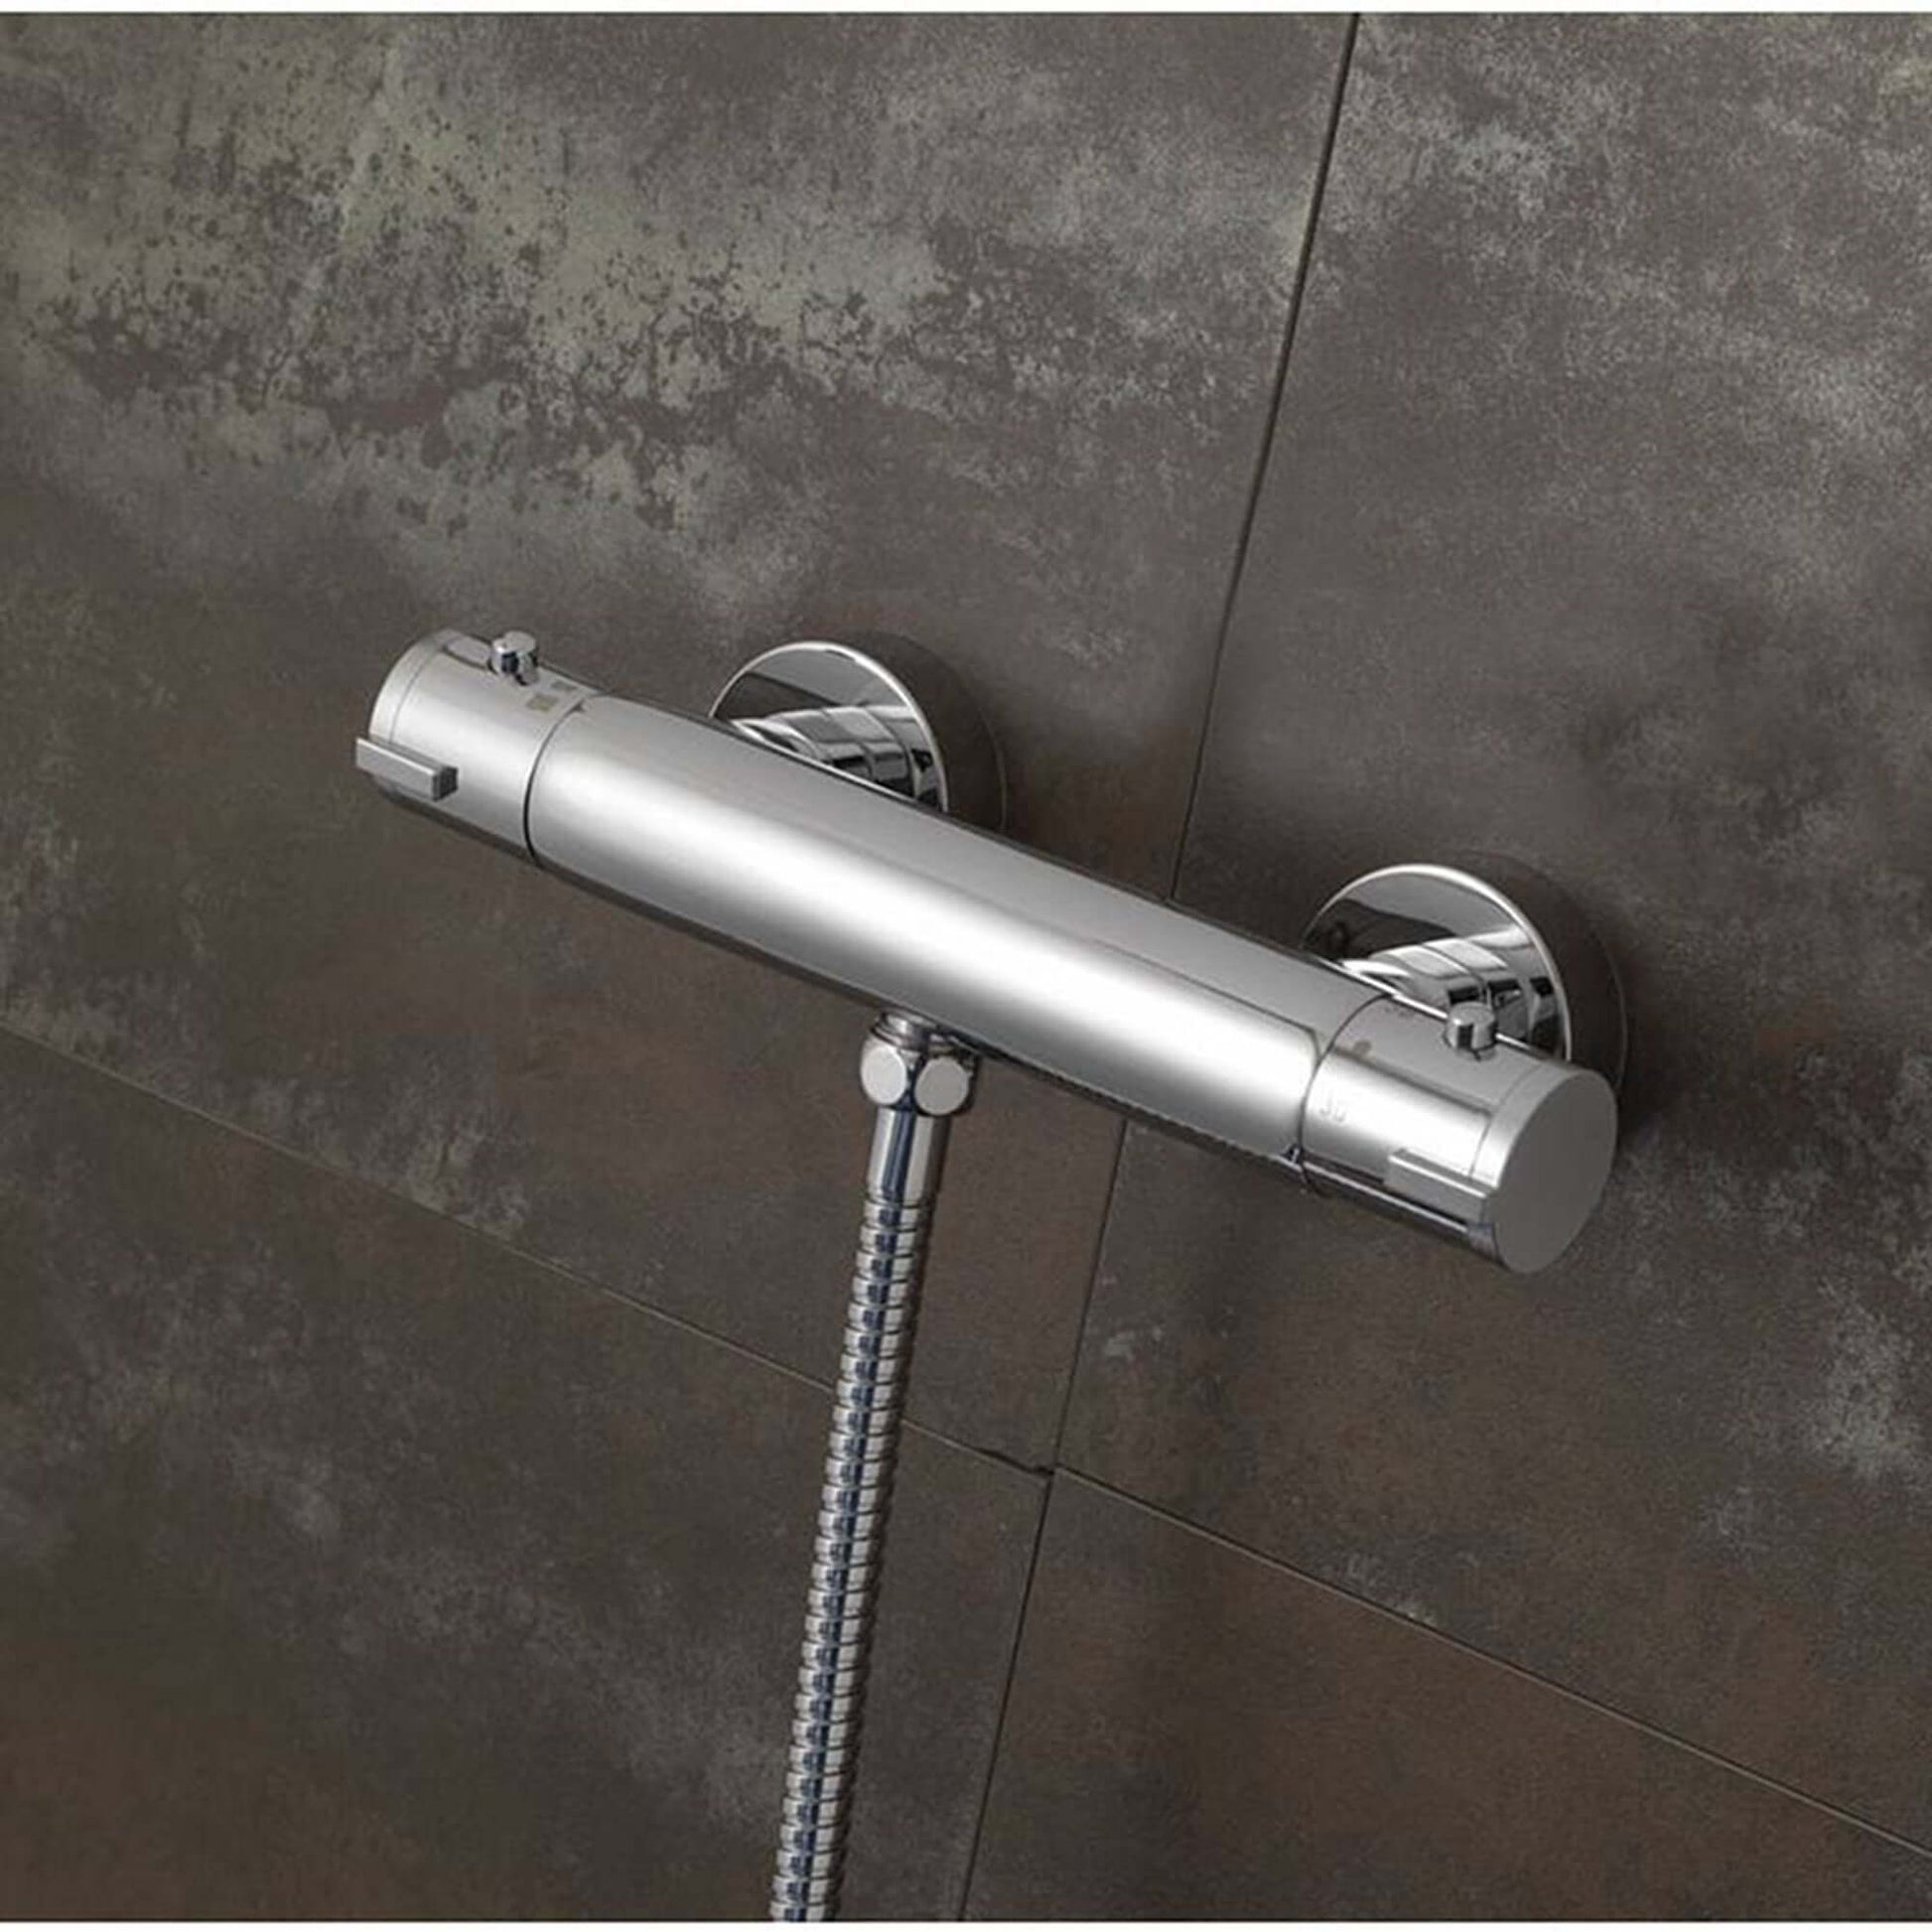 Dune contemporary thermostatic shower mixer bar valve with slider rail kit - chrome - Showers